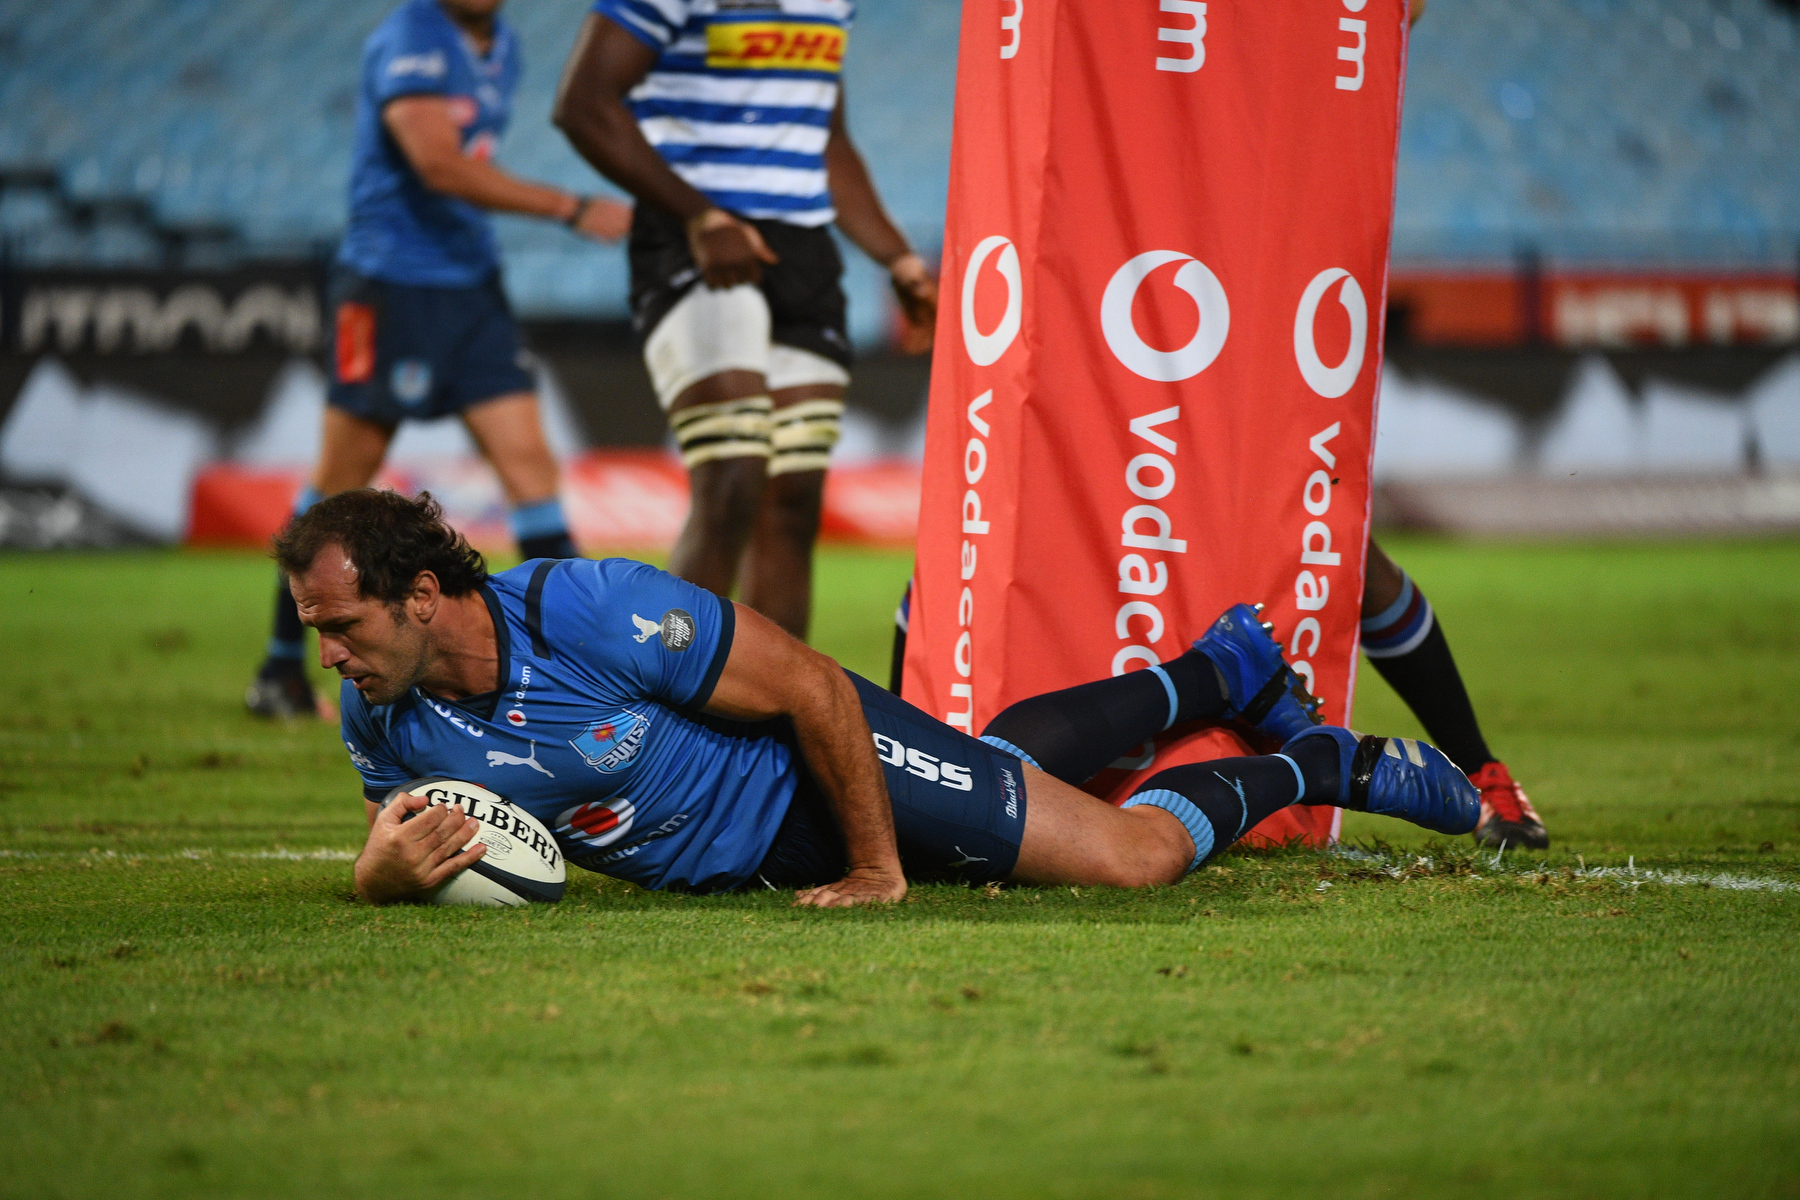 Exciting Vodacom Bulls team for Sigma Lions clash